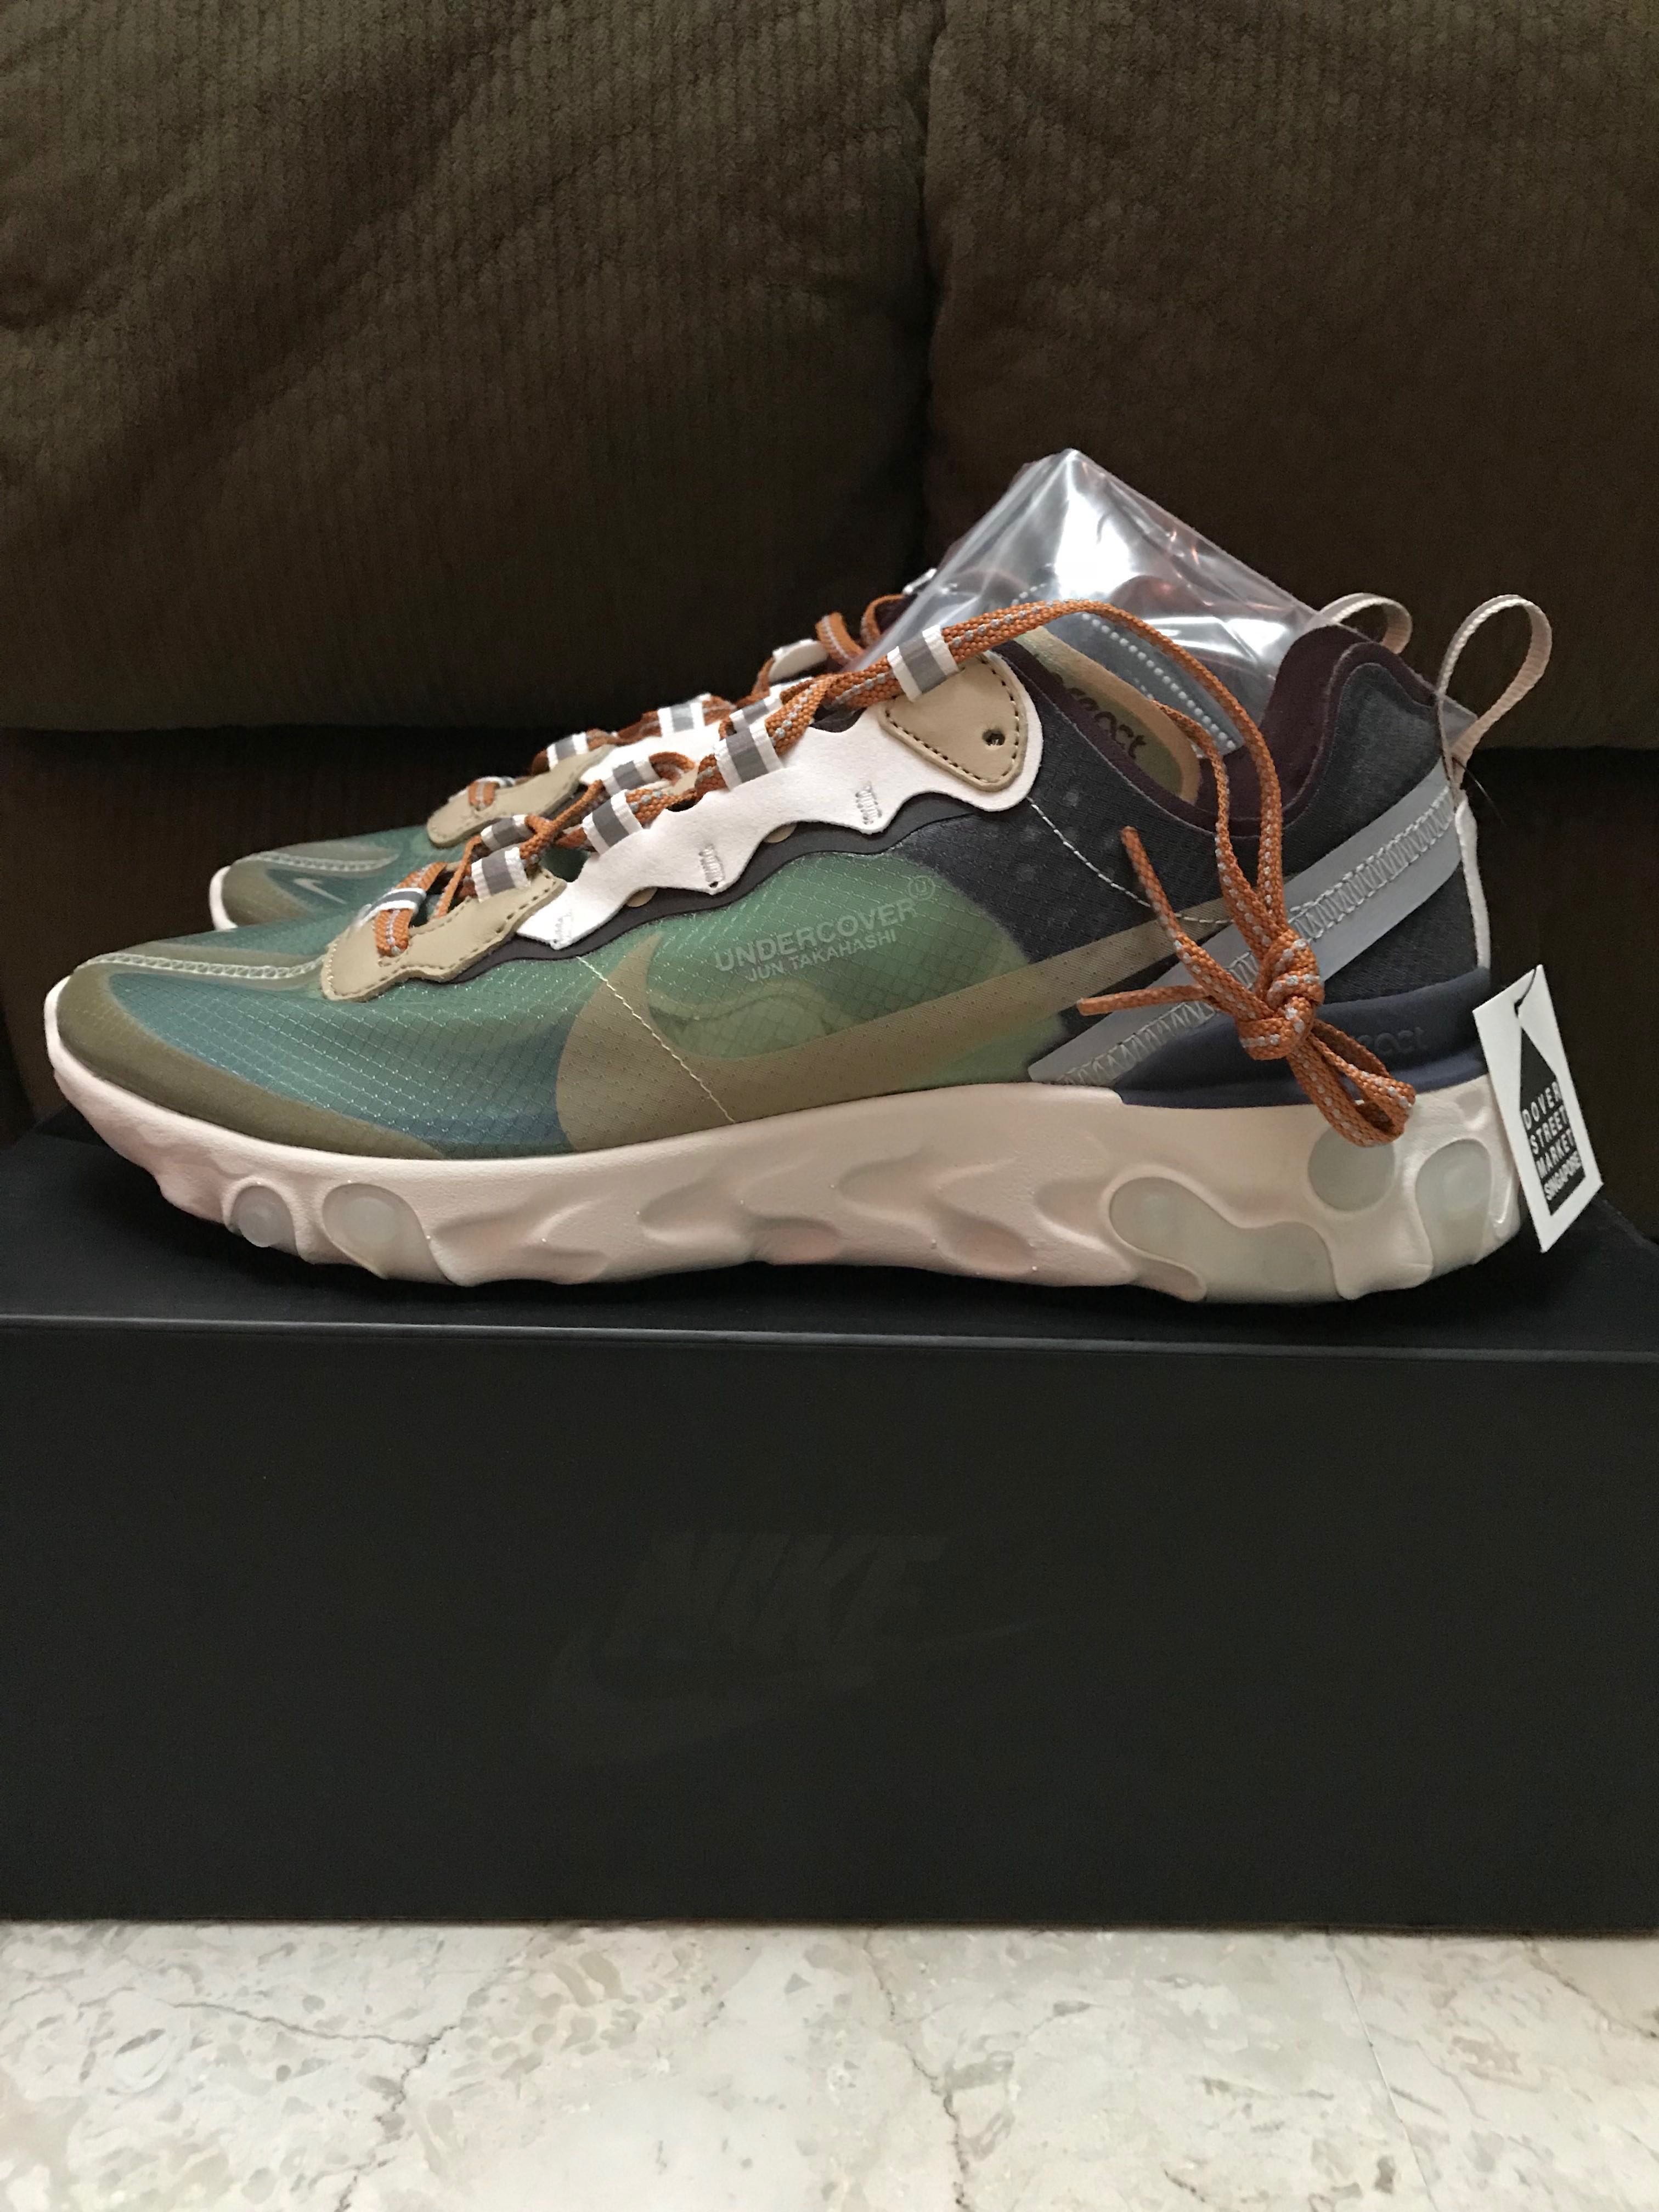 US 8 Undercover Nike React Element 87 